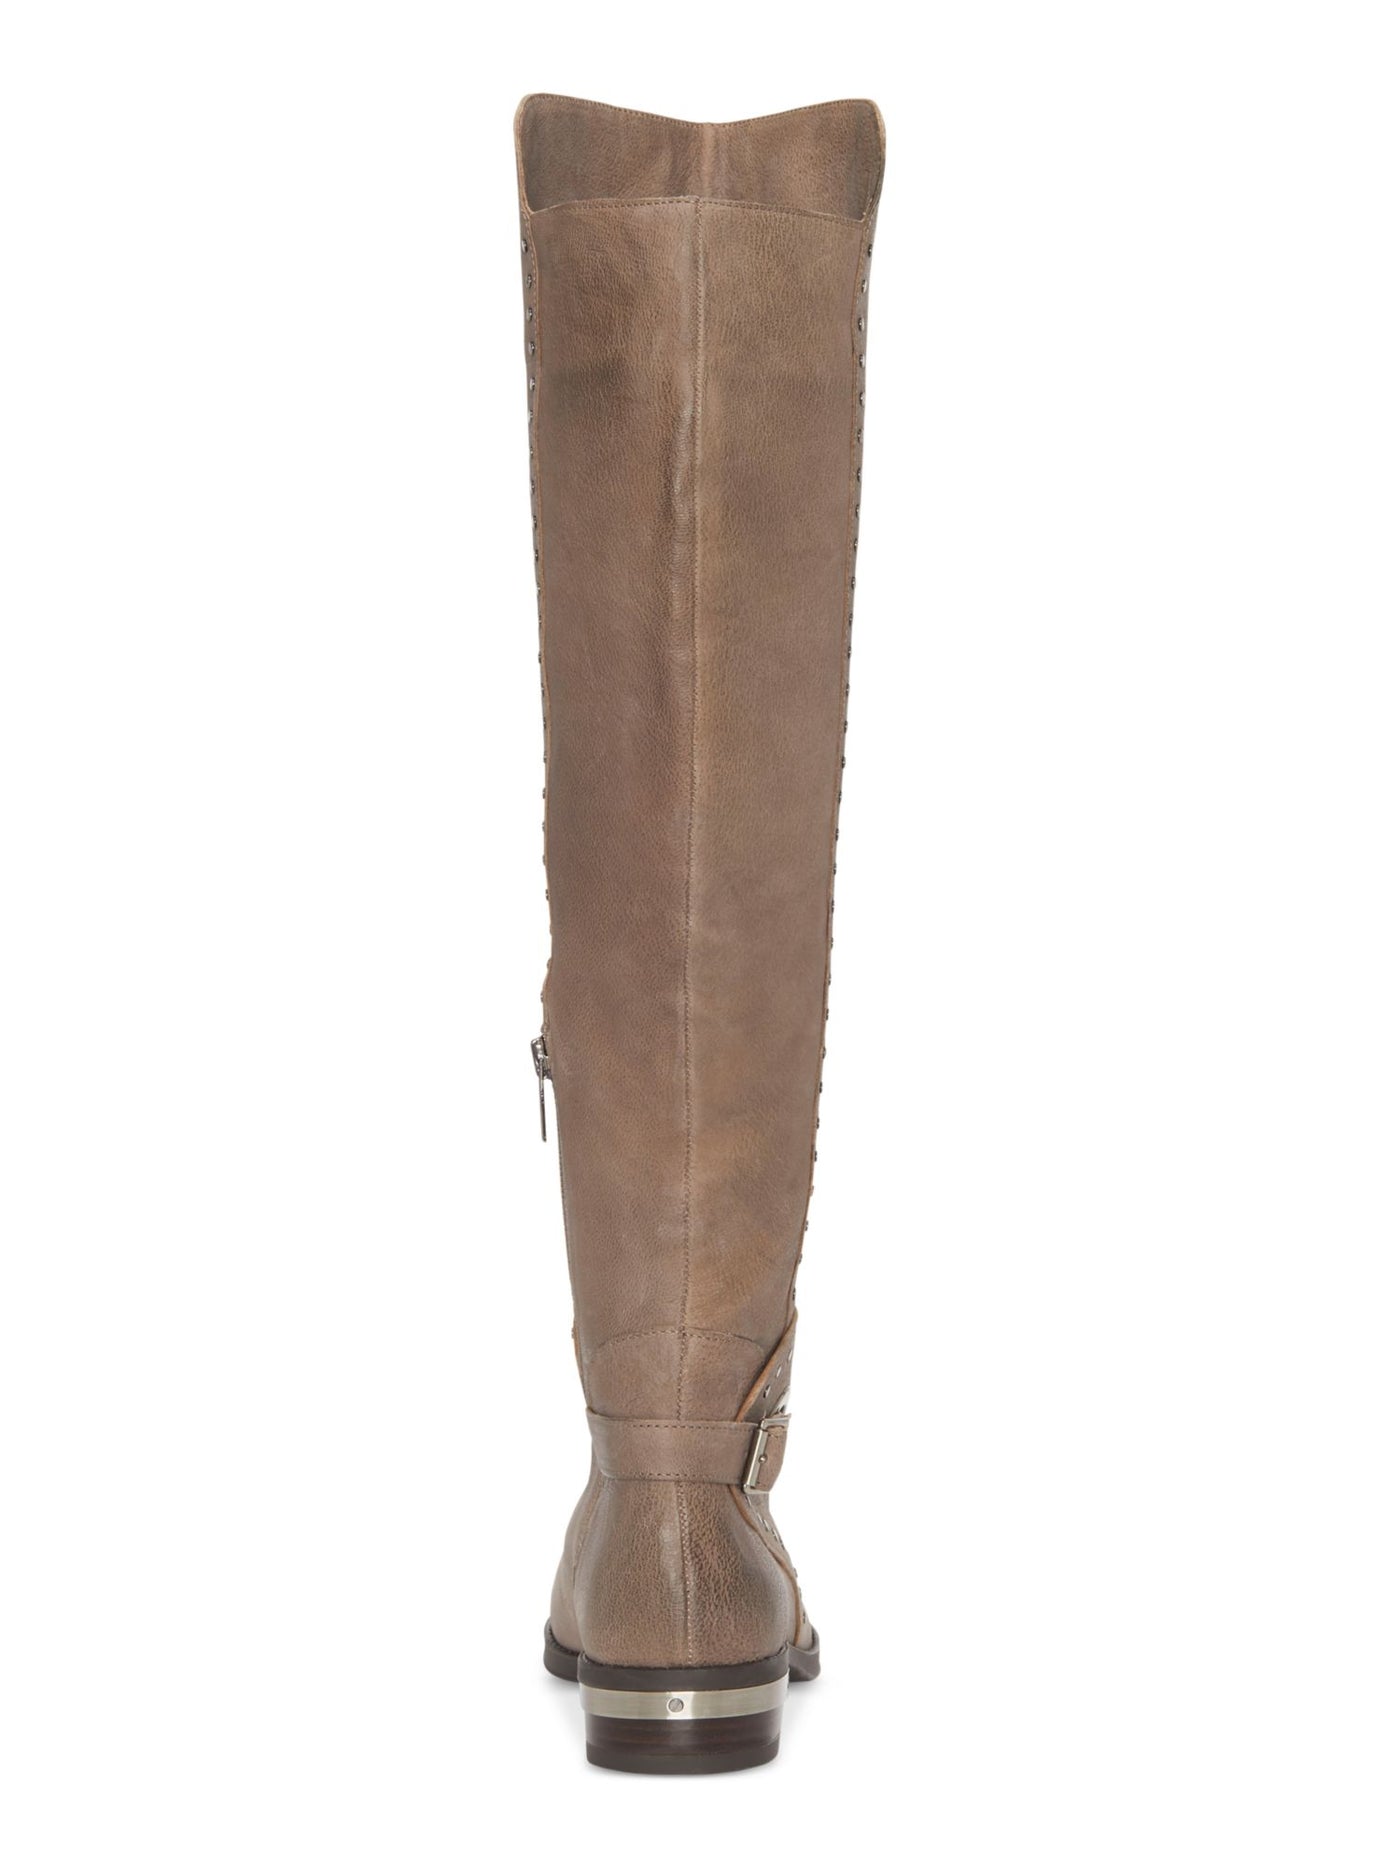 VINCE CAMUTO Womens Beige Studded Buckle Accent Wide Calf Round Toe Stacked Heel Zip-Up Leather Riding Boot 5.5 M WC